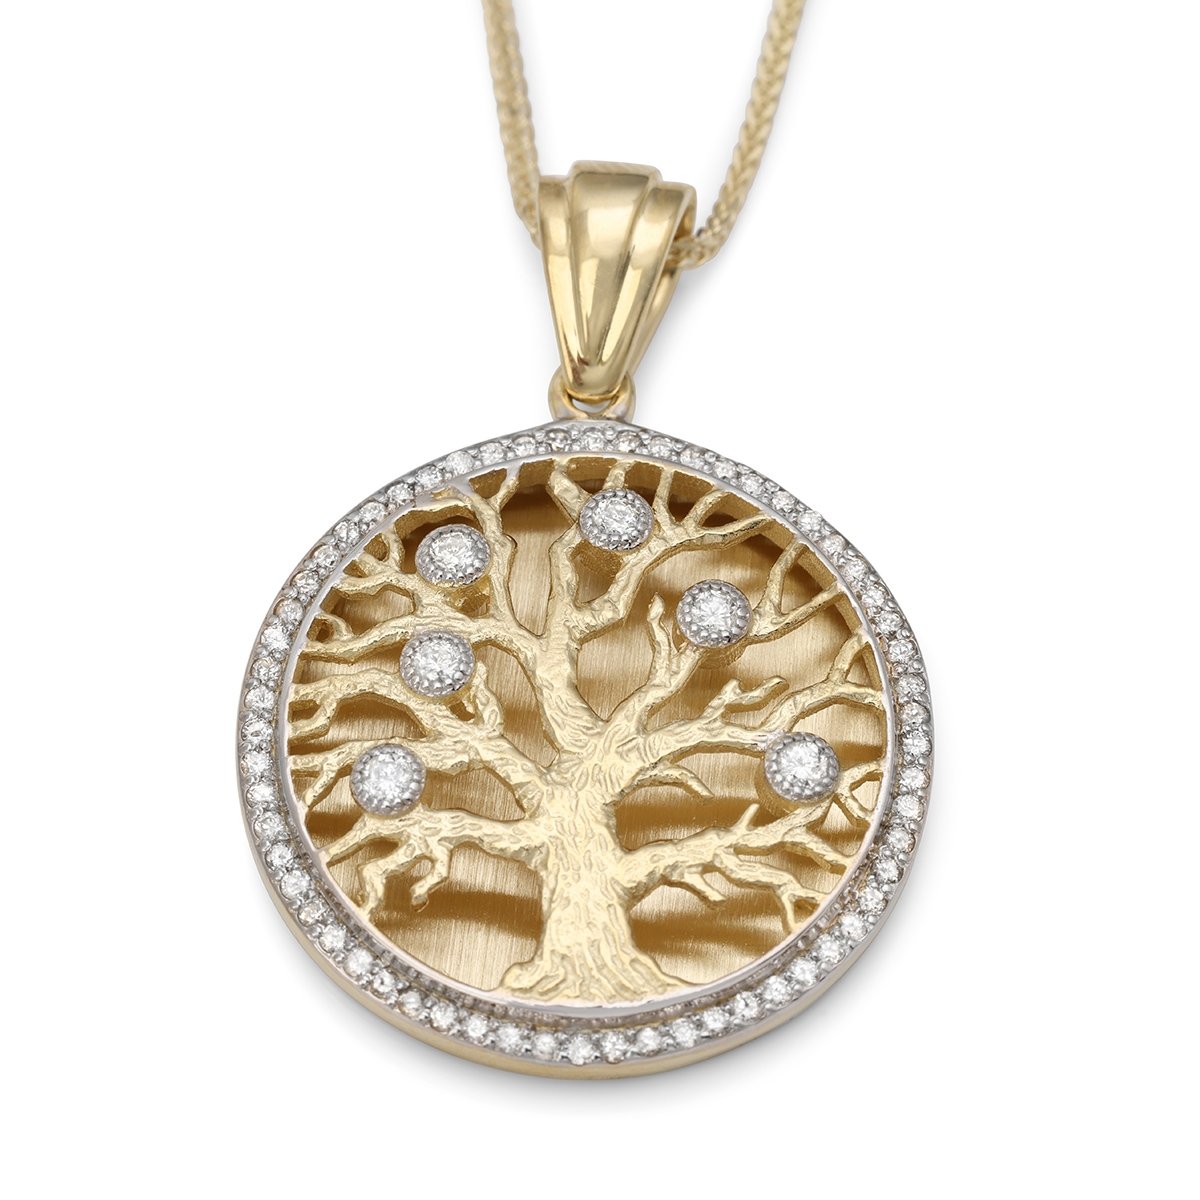 Top 20 Luxury Jewish Jewelry Pieces from Israel